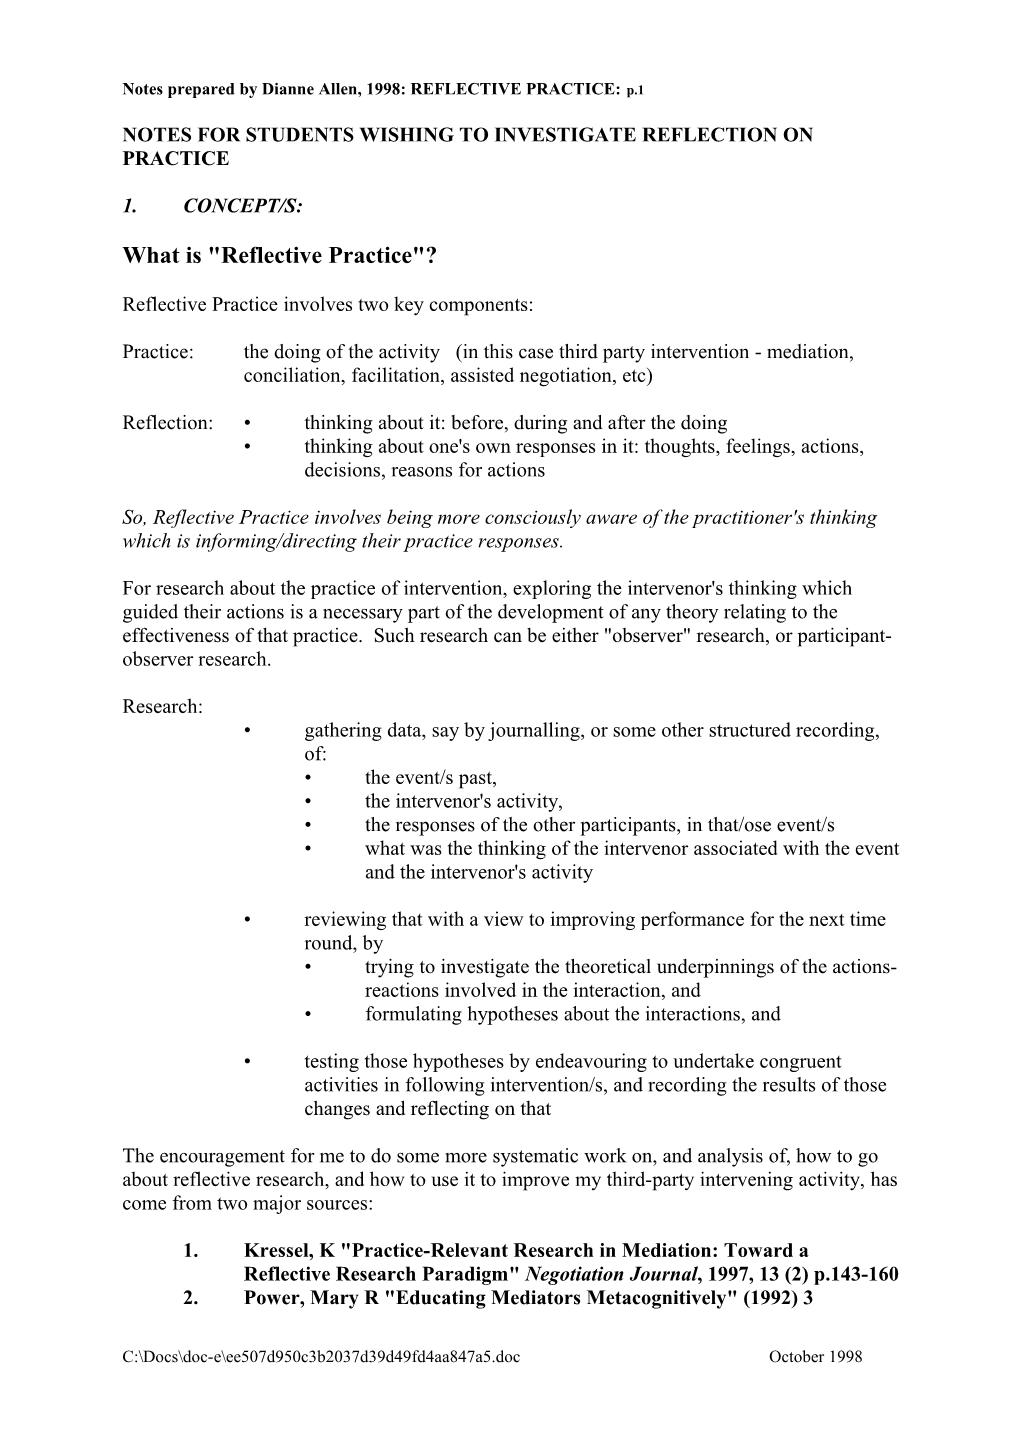 Notes for Students Wishing to Investigate Reflection on Practice